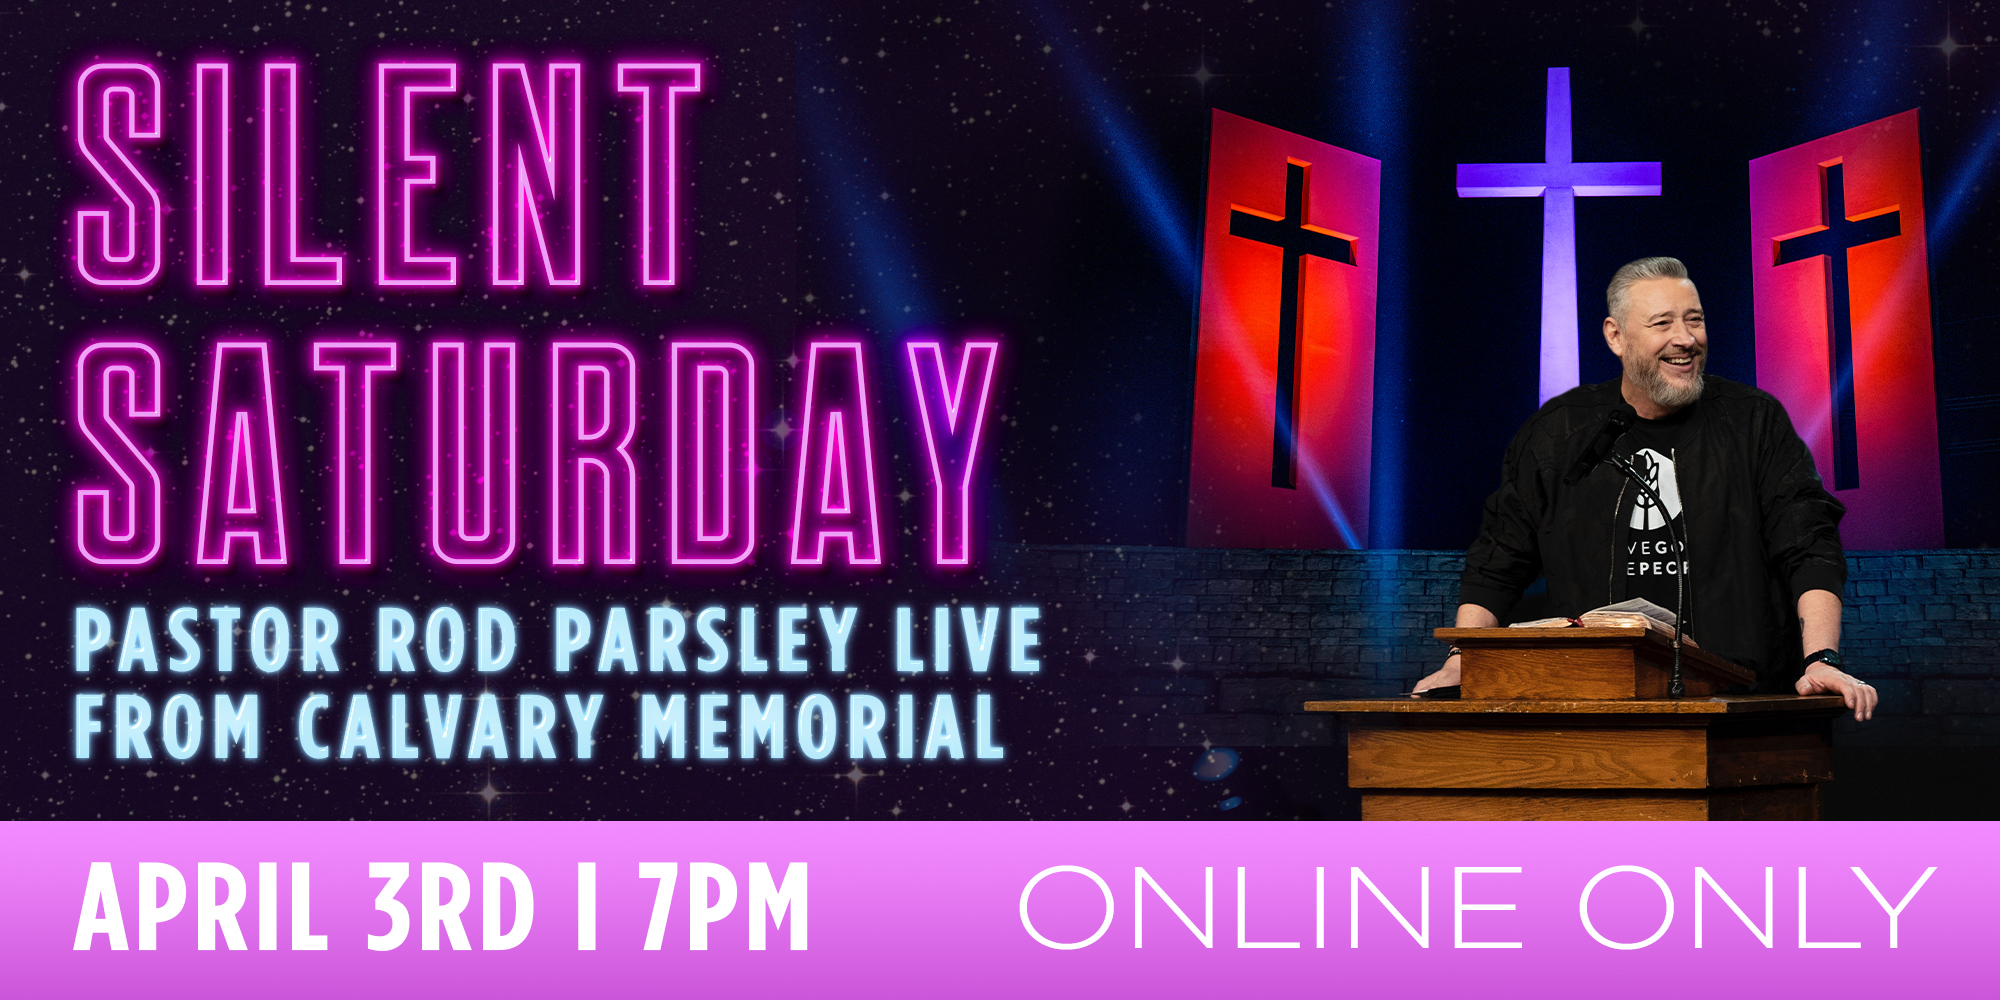 Silent Saturday Pastor Rod Parsley Live from Calvary Memorial April 3rd at 7pm Online Only